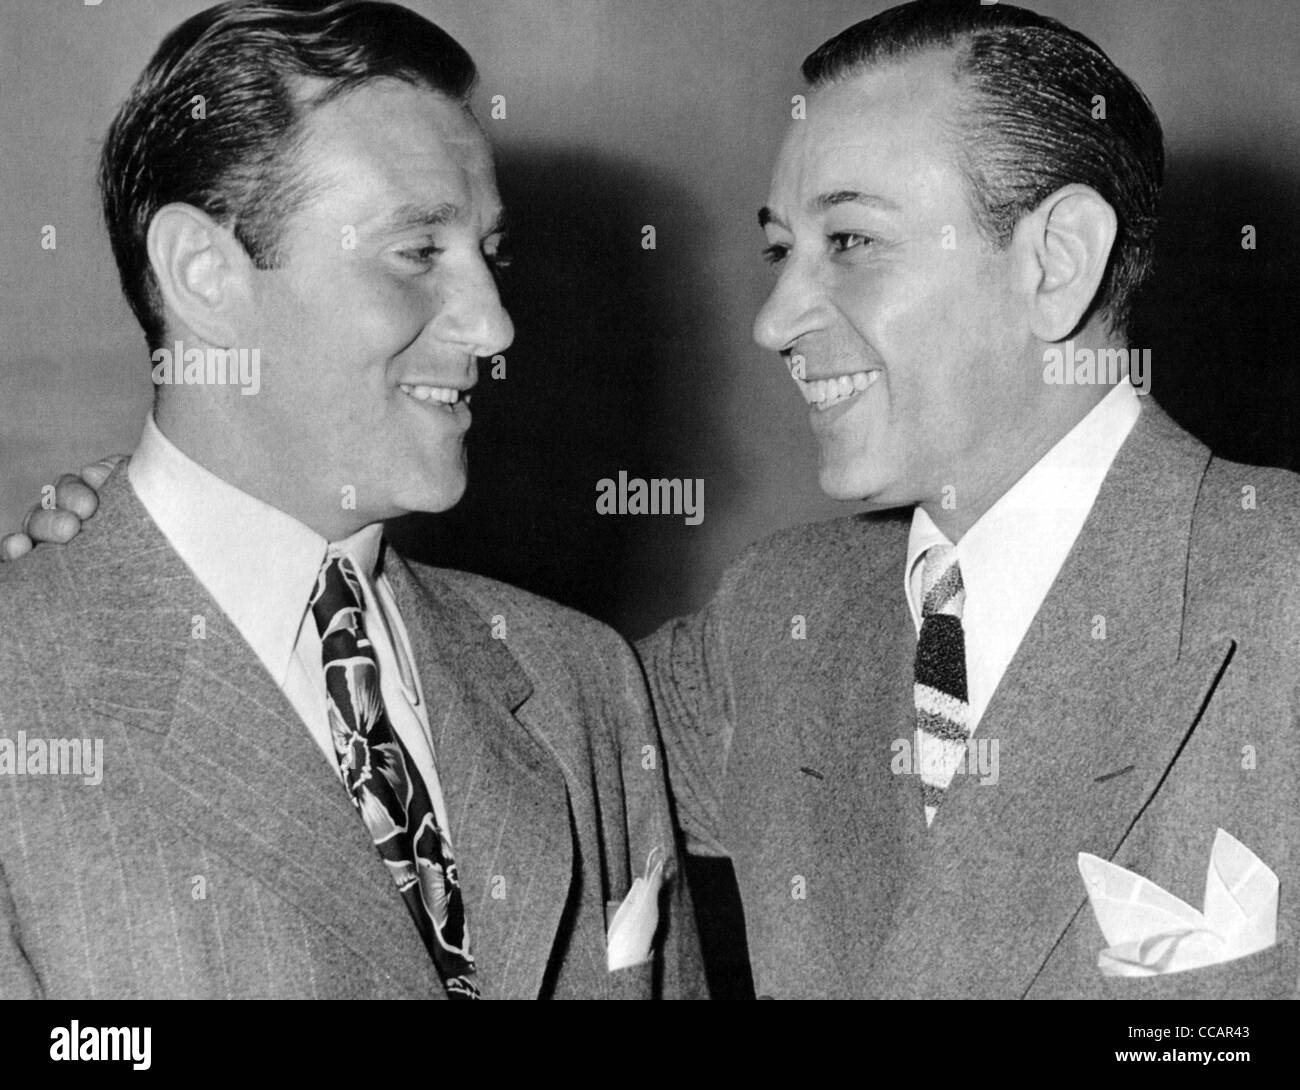 Image result for george raft and bugsy siegel